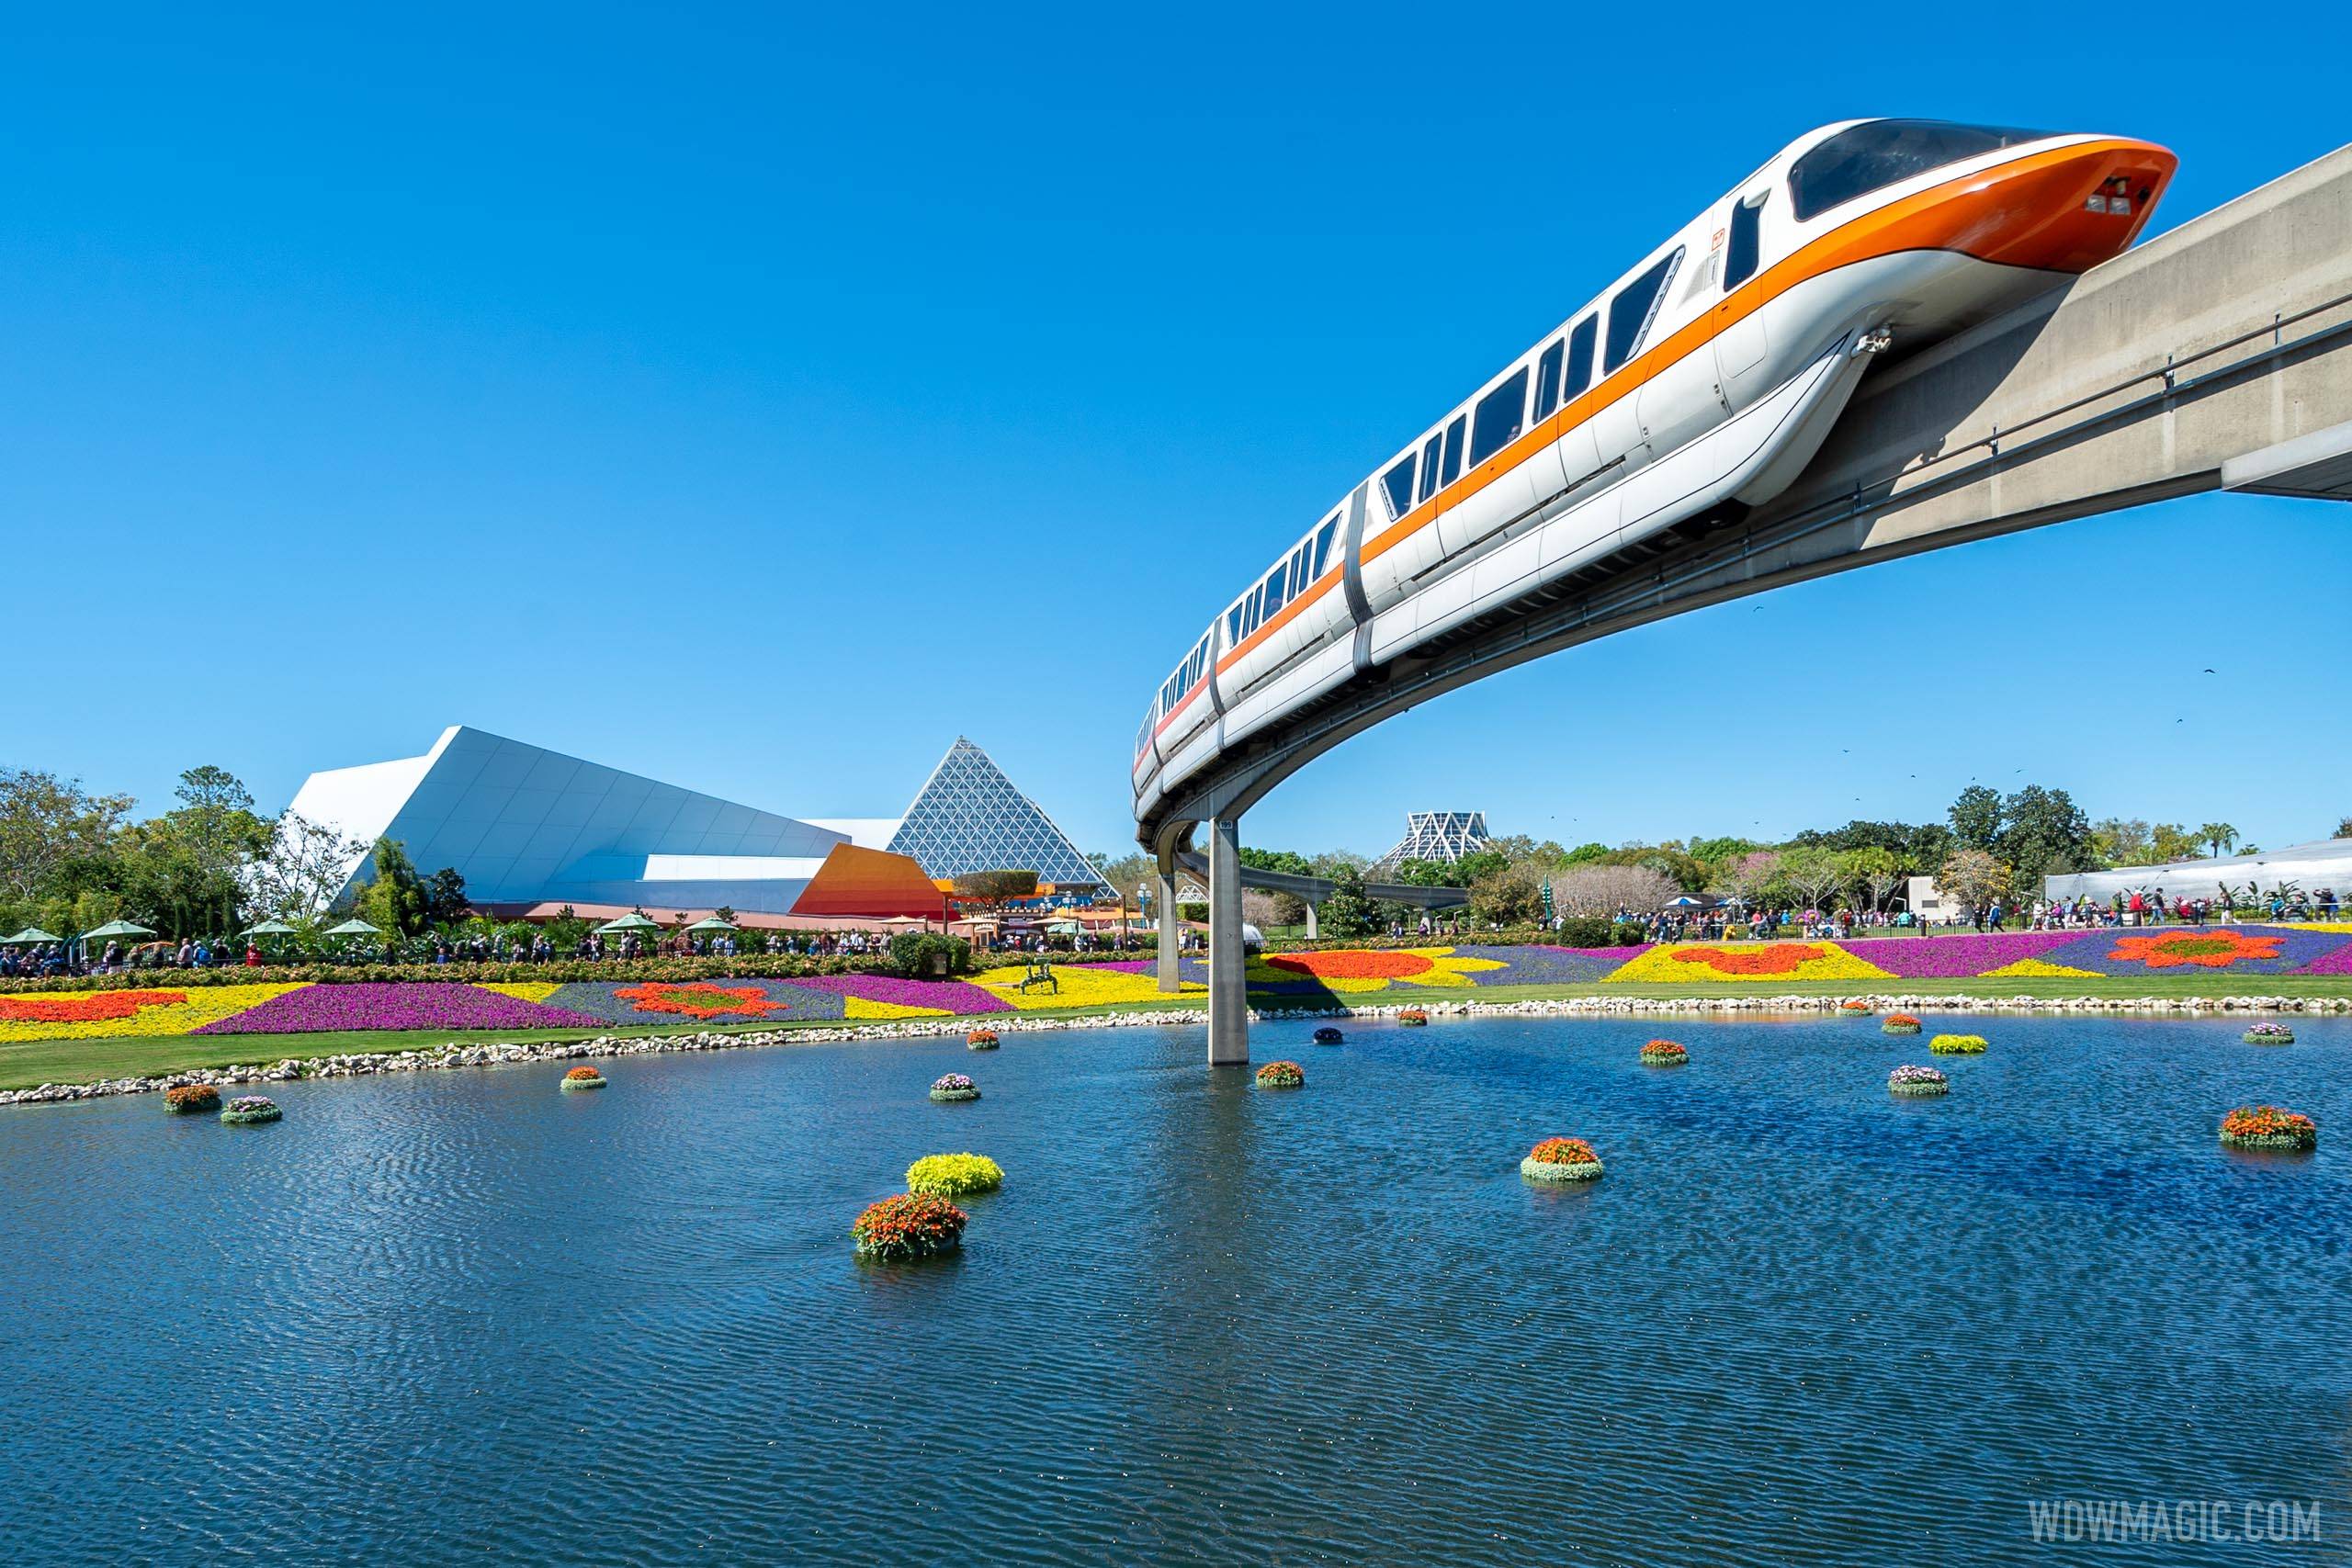 Monorail System Express Beam closures this weekend